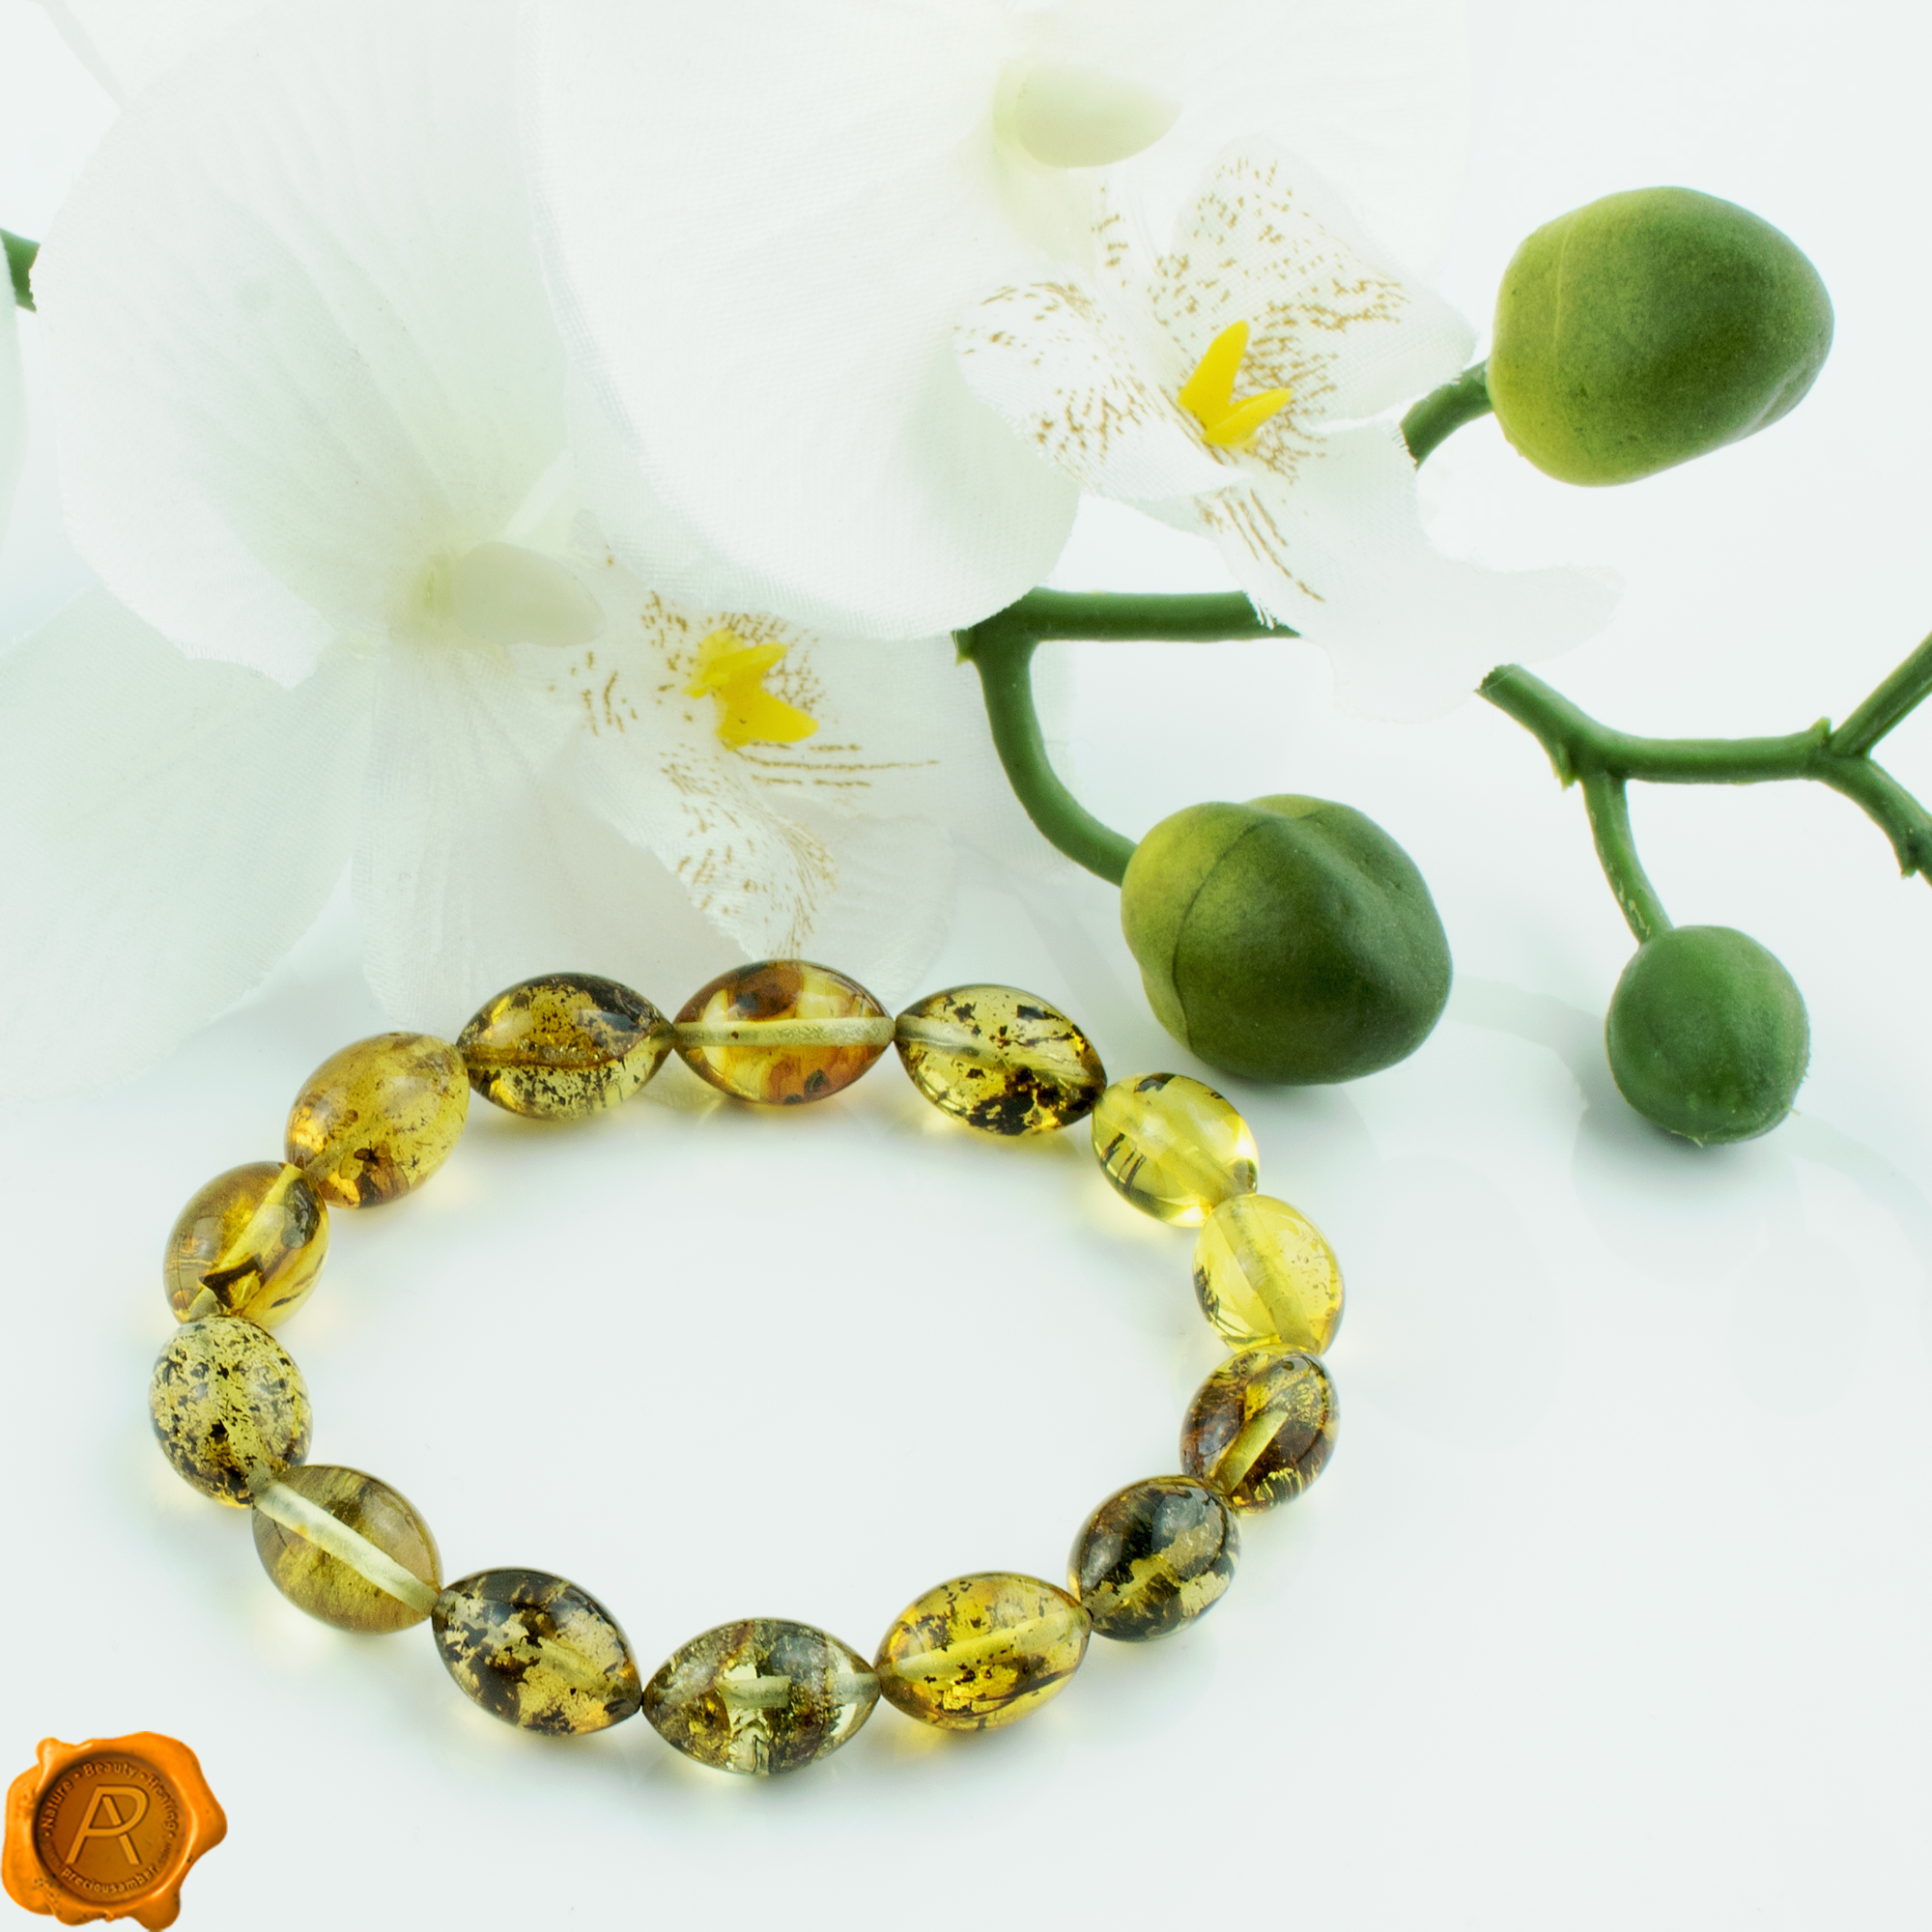 Natural Baltic Amber Jewellery from Poland based in Singapore  Amber  Baltic Jewellery